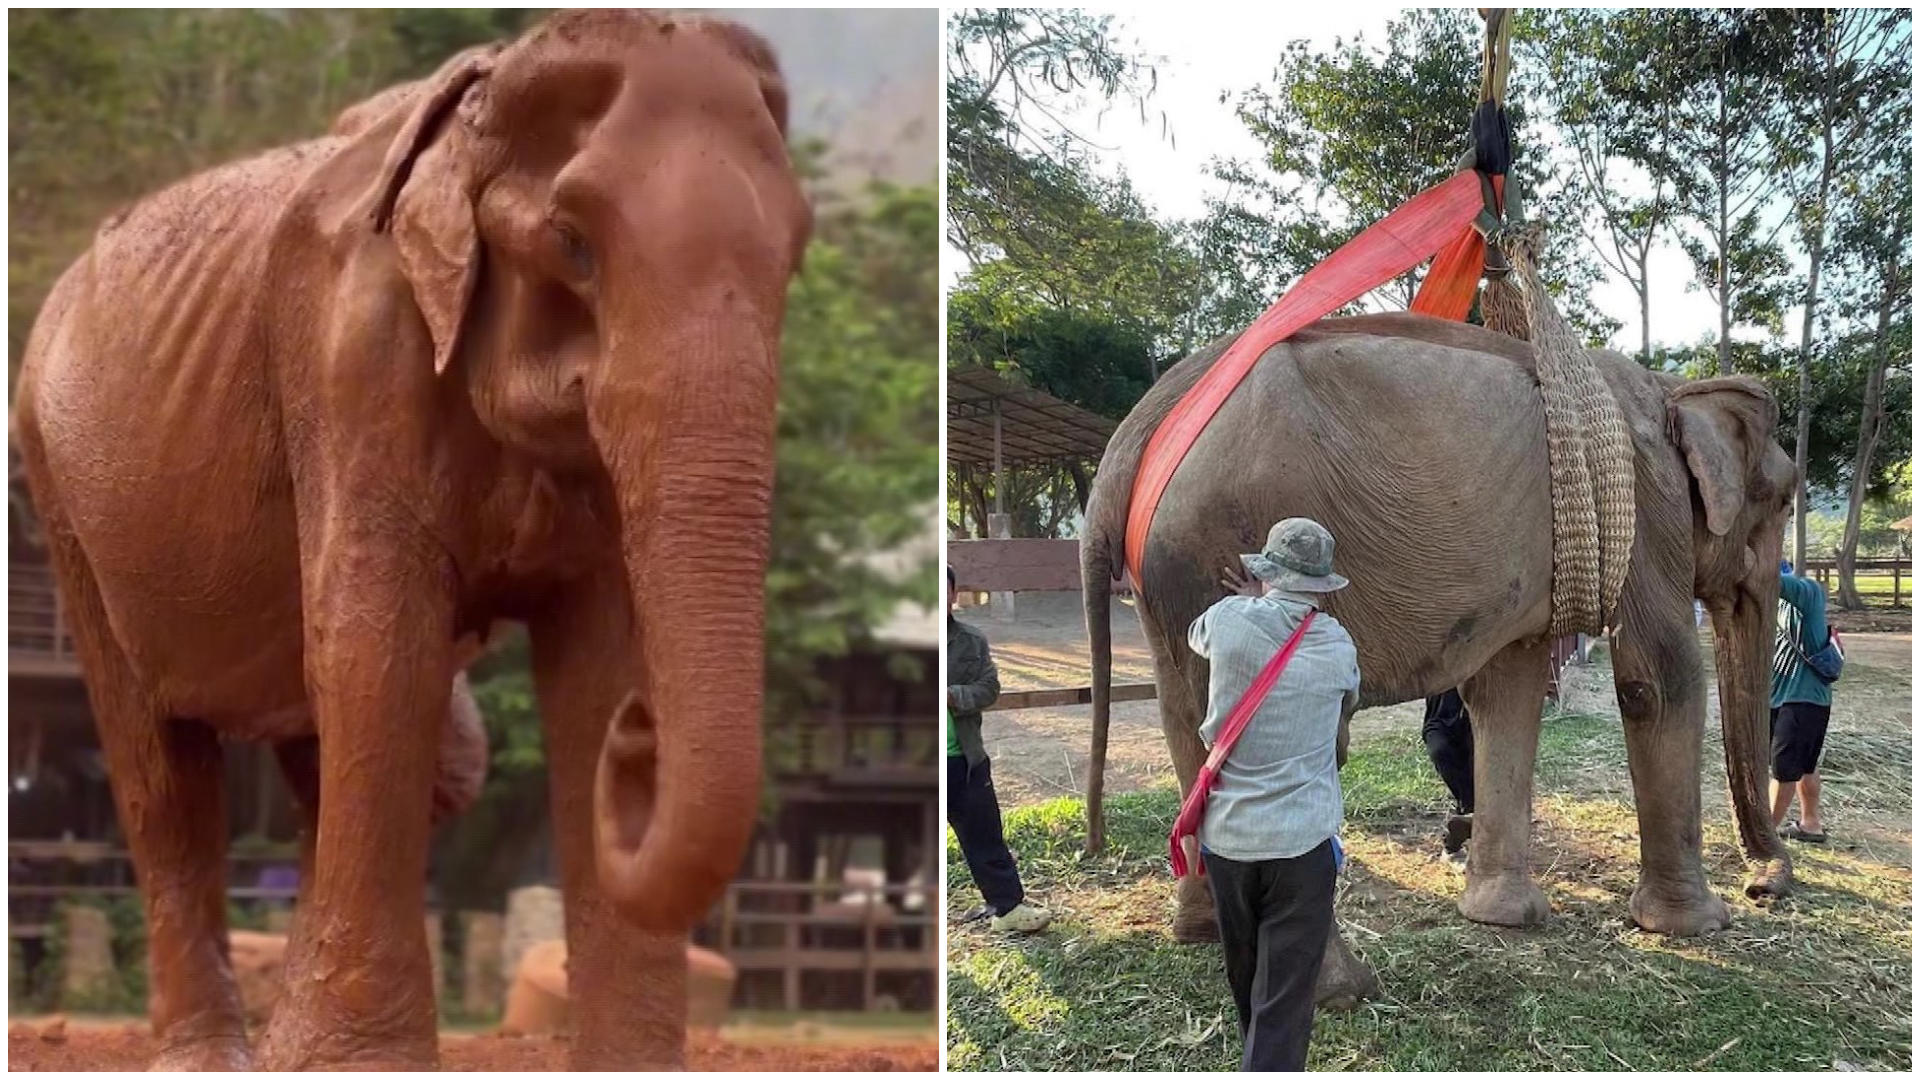 Female elephant released after 80 years of imprisonment!  Happy ending for Chompoon